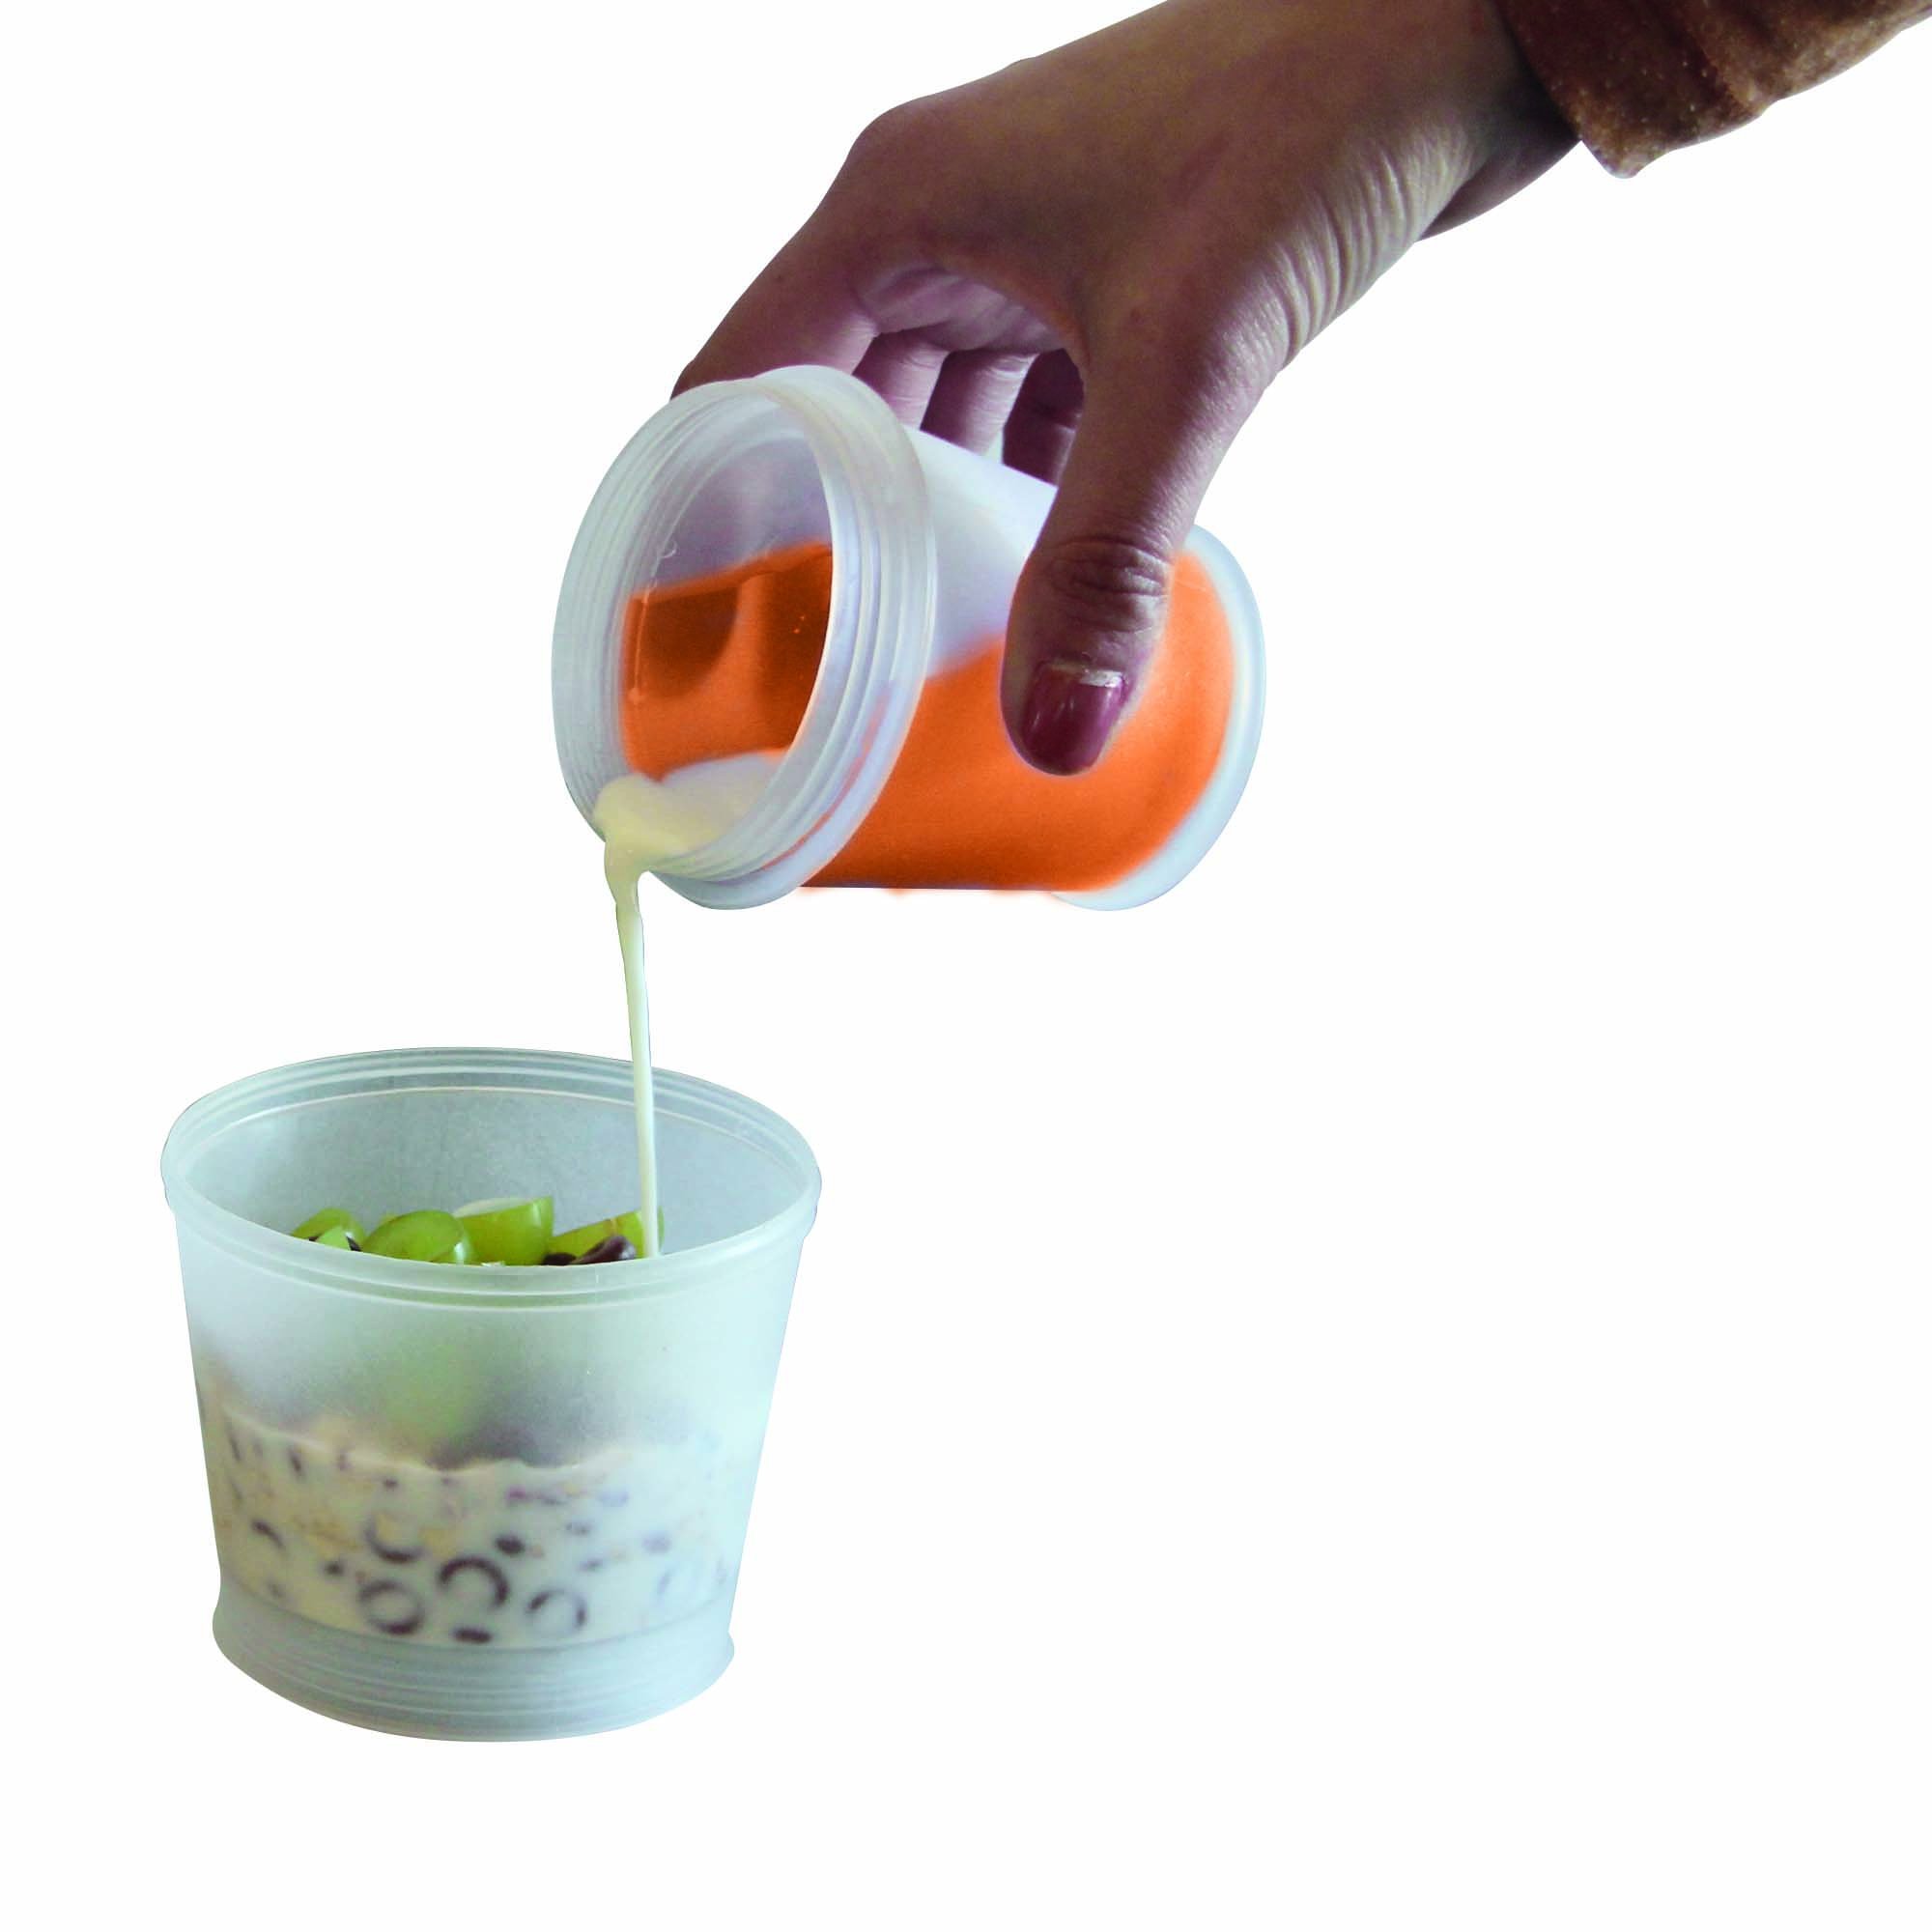 STONELINE® Muesli cup to-go with cooling battery, orange